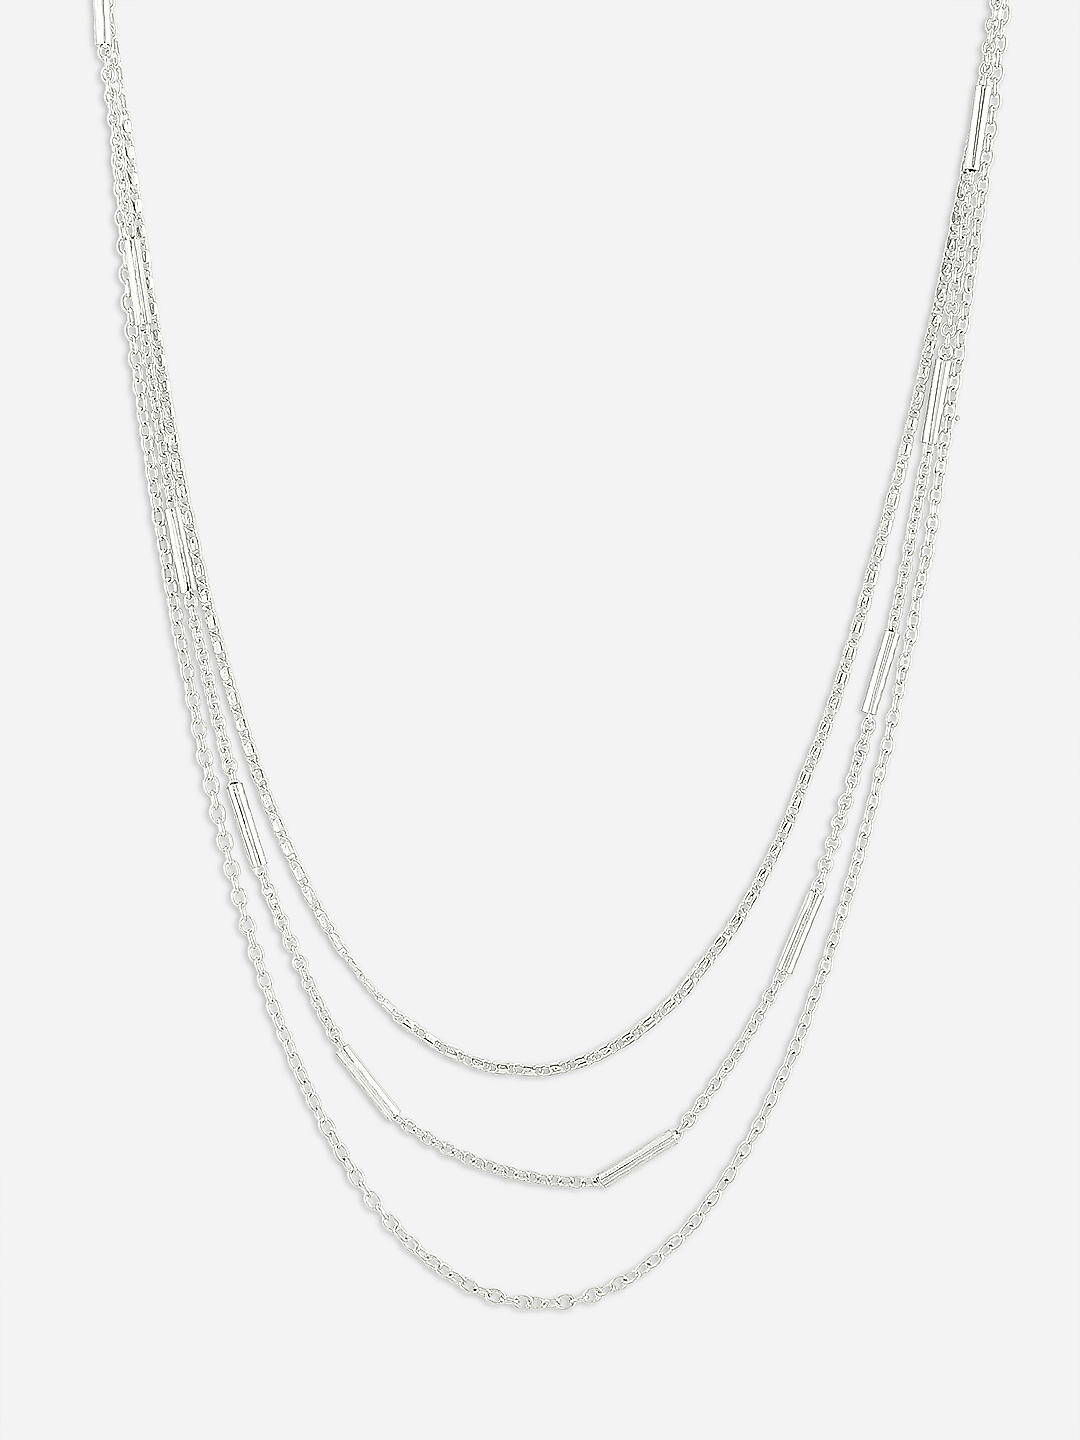 Next Chapter Layered Necklace In Silver • Impressions Online Boutique